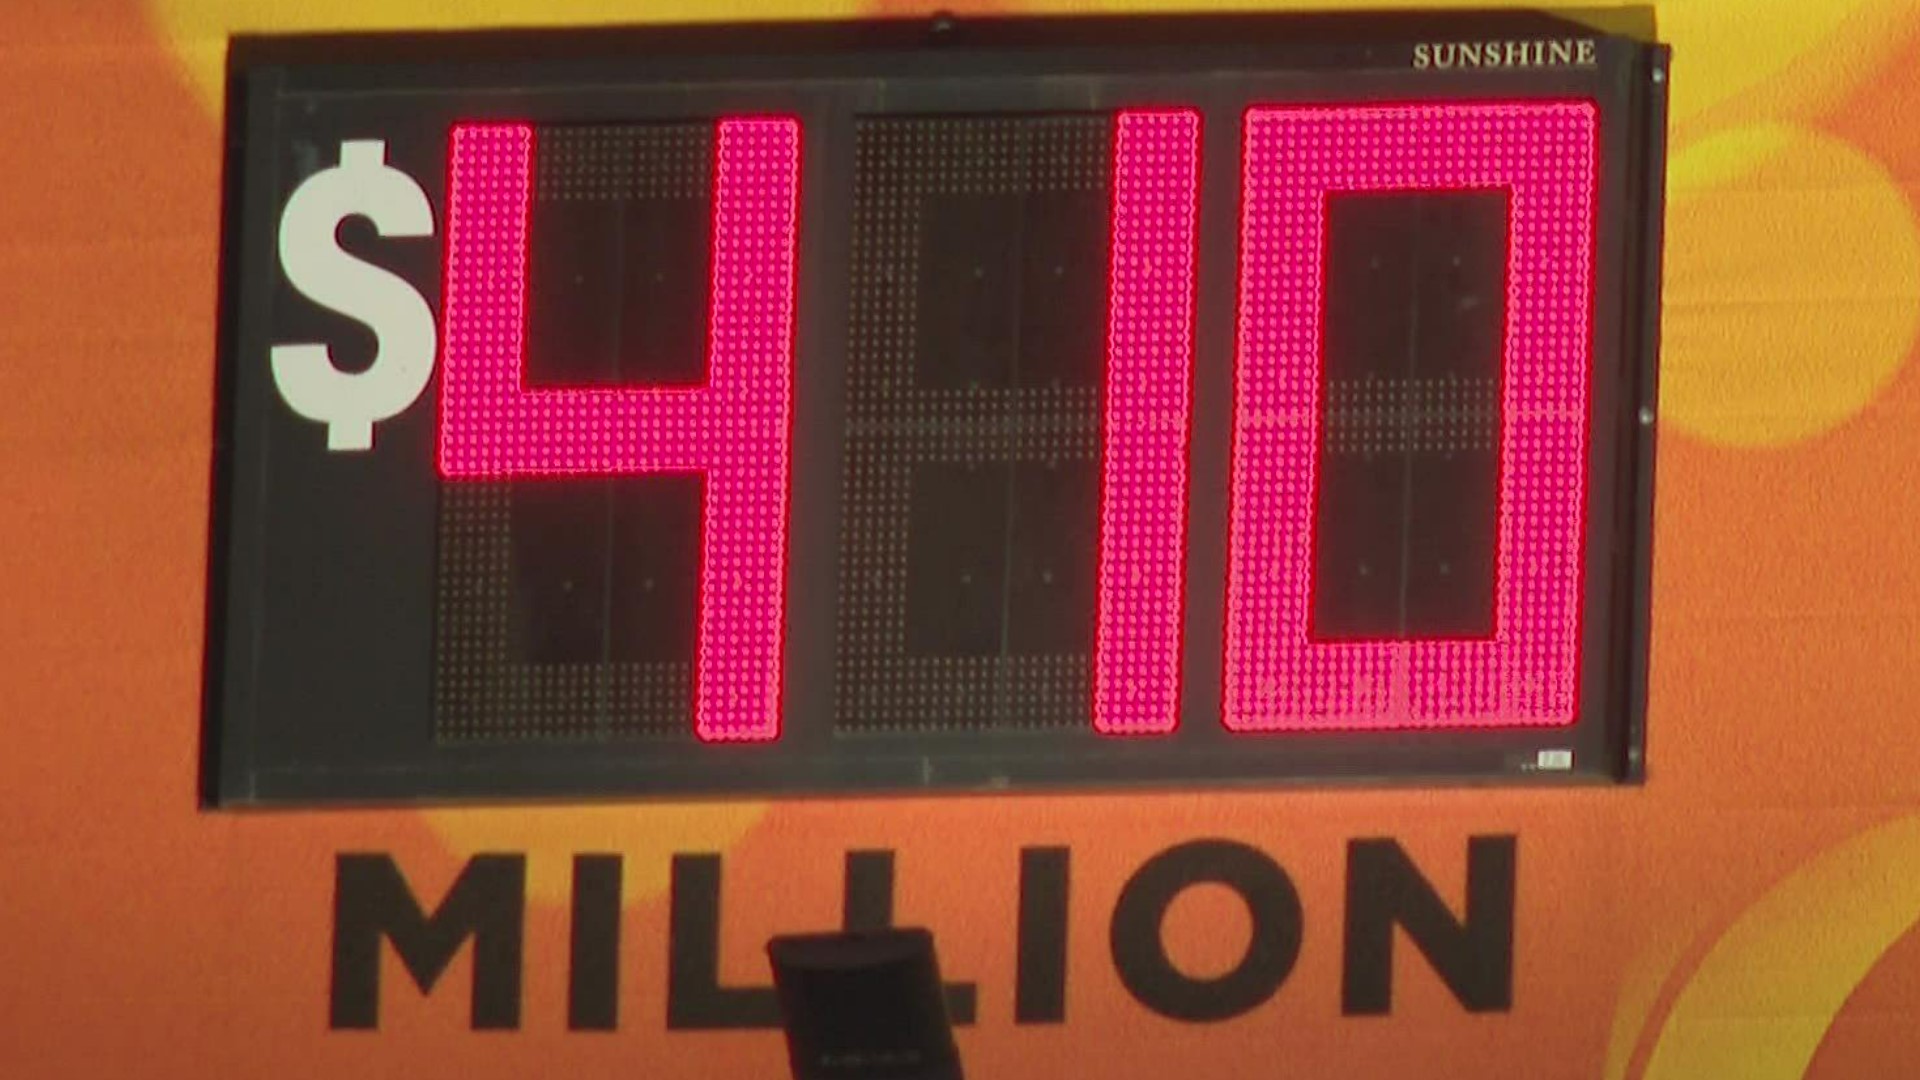 No one matched all the numbers in last night's mega-millions drawing so the jackpot is now at $410 million.